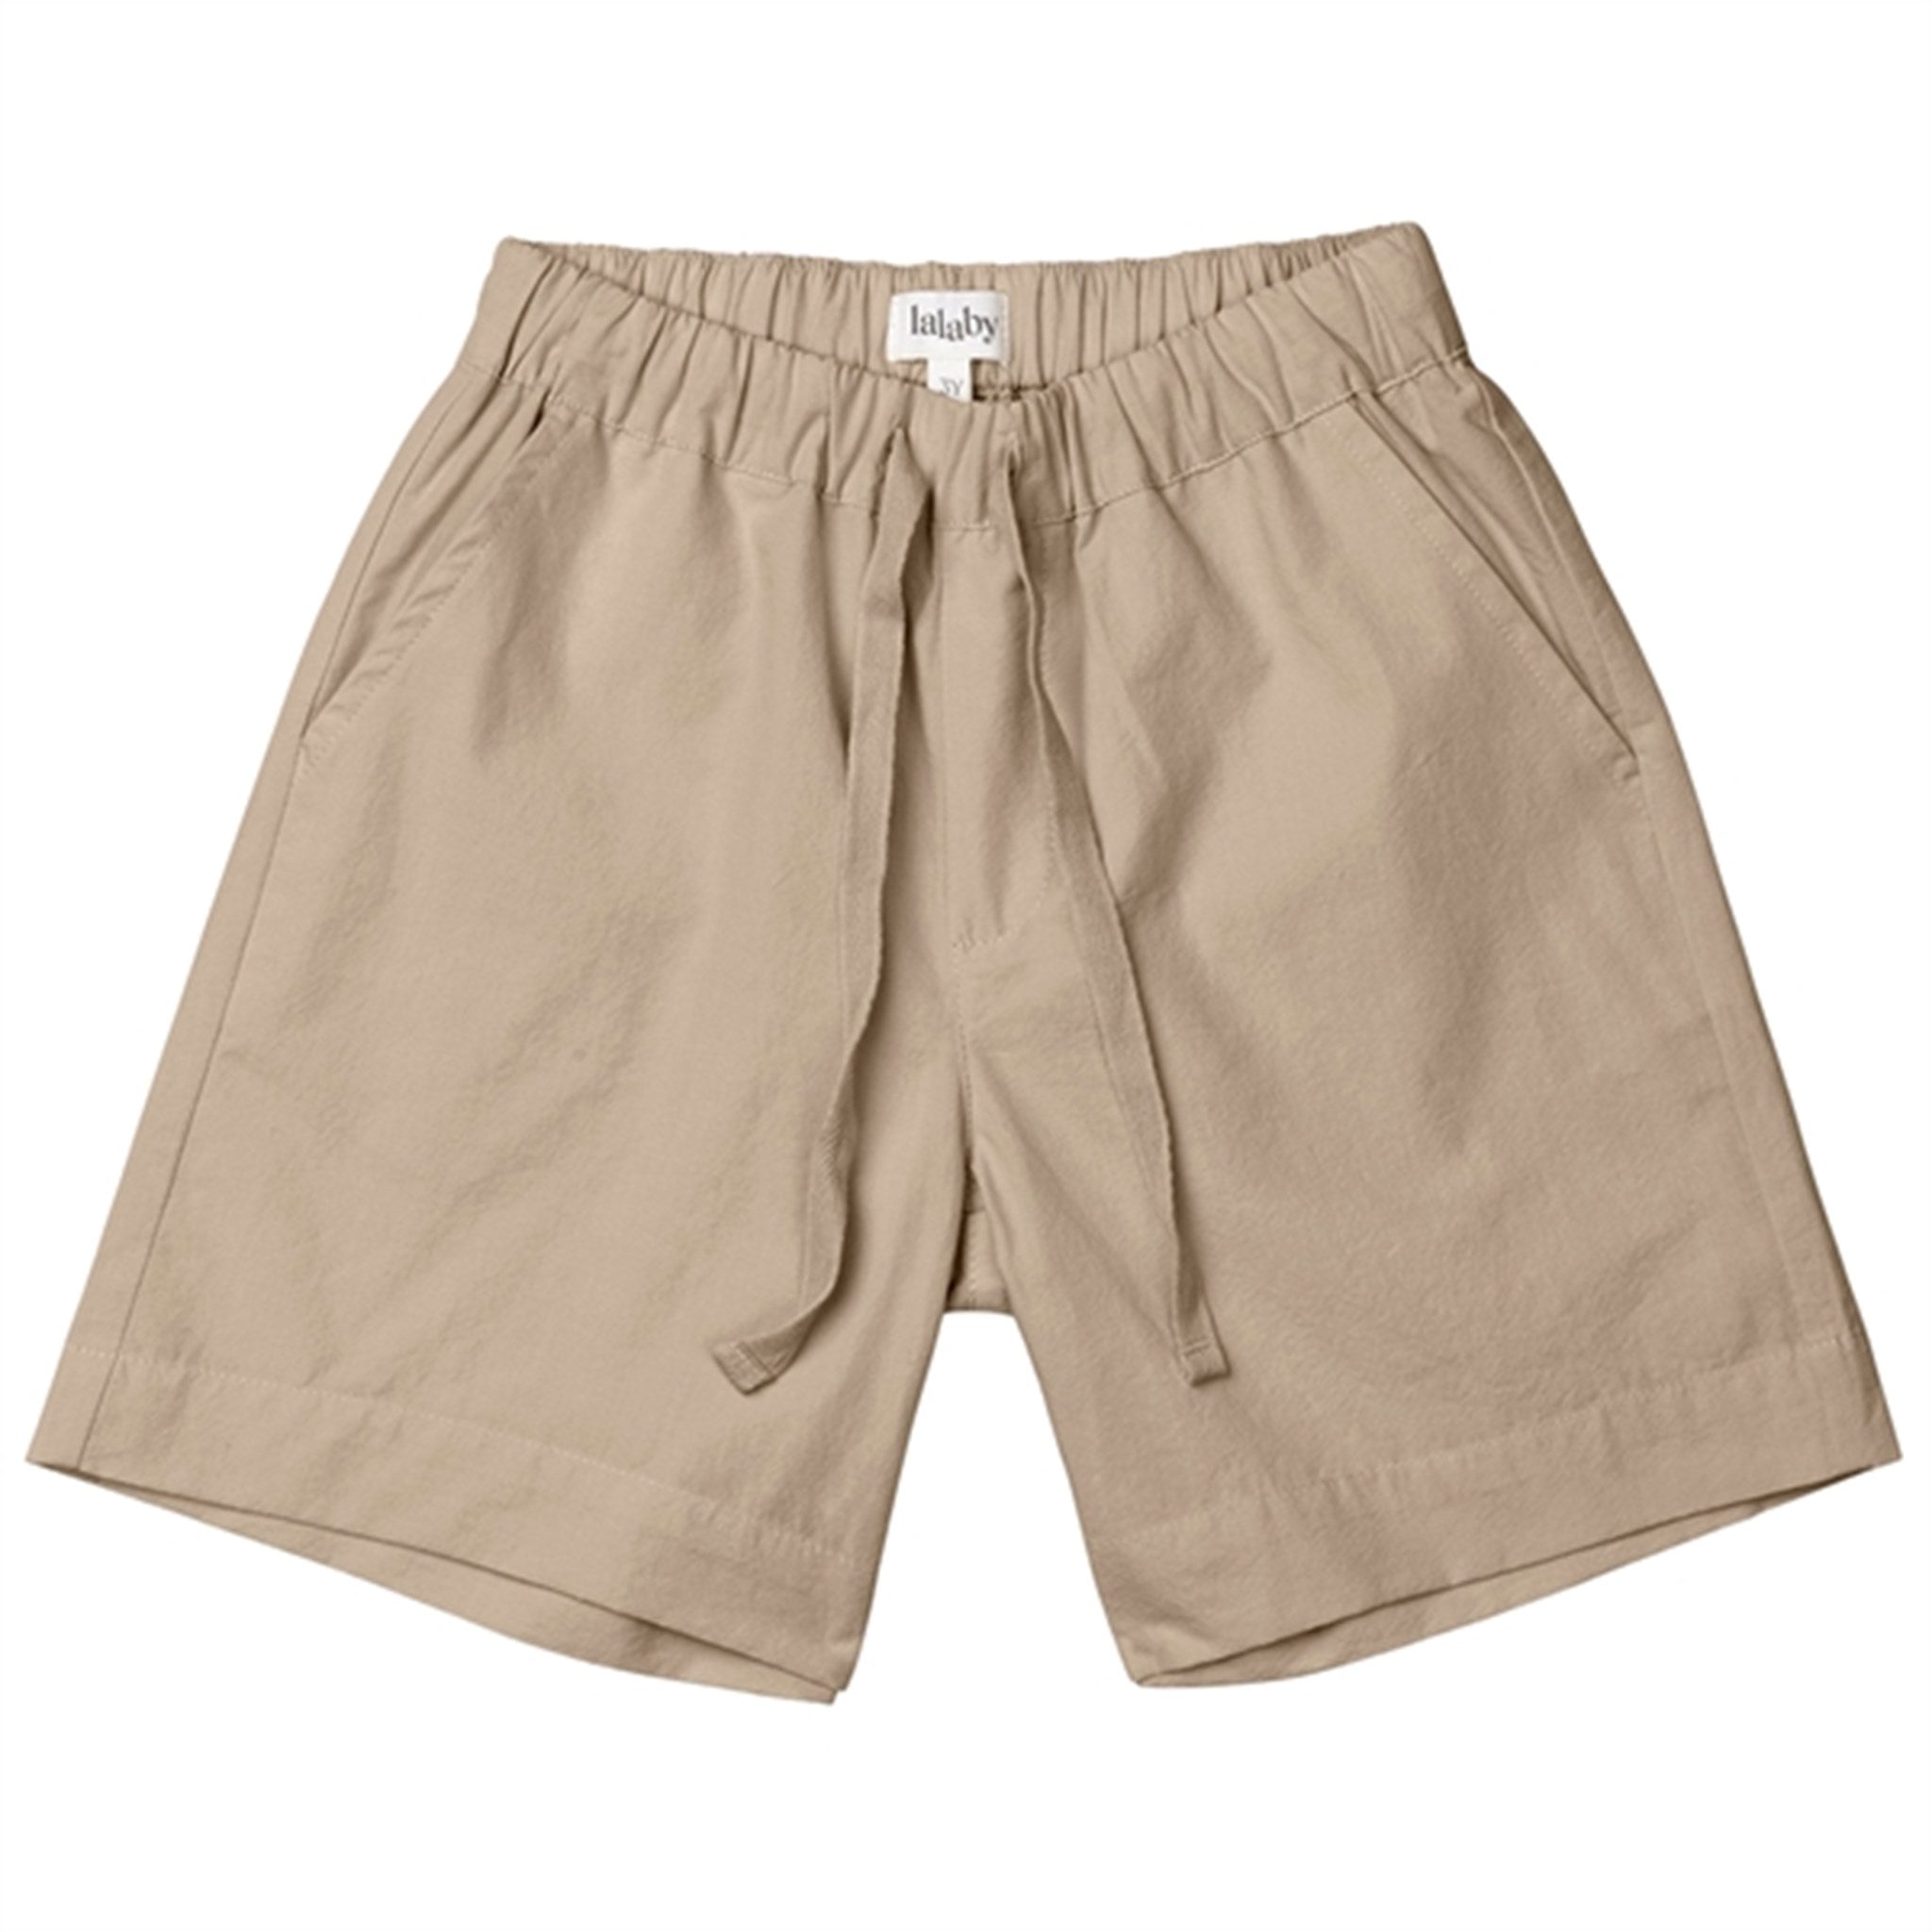 lalaby Toffee Wilder Shorts